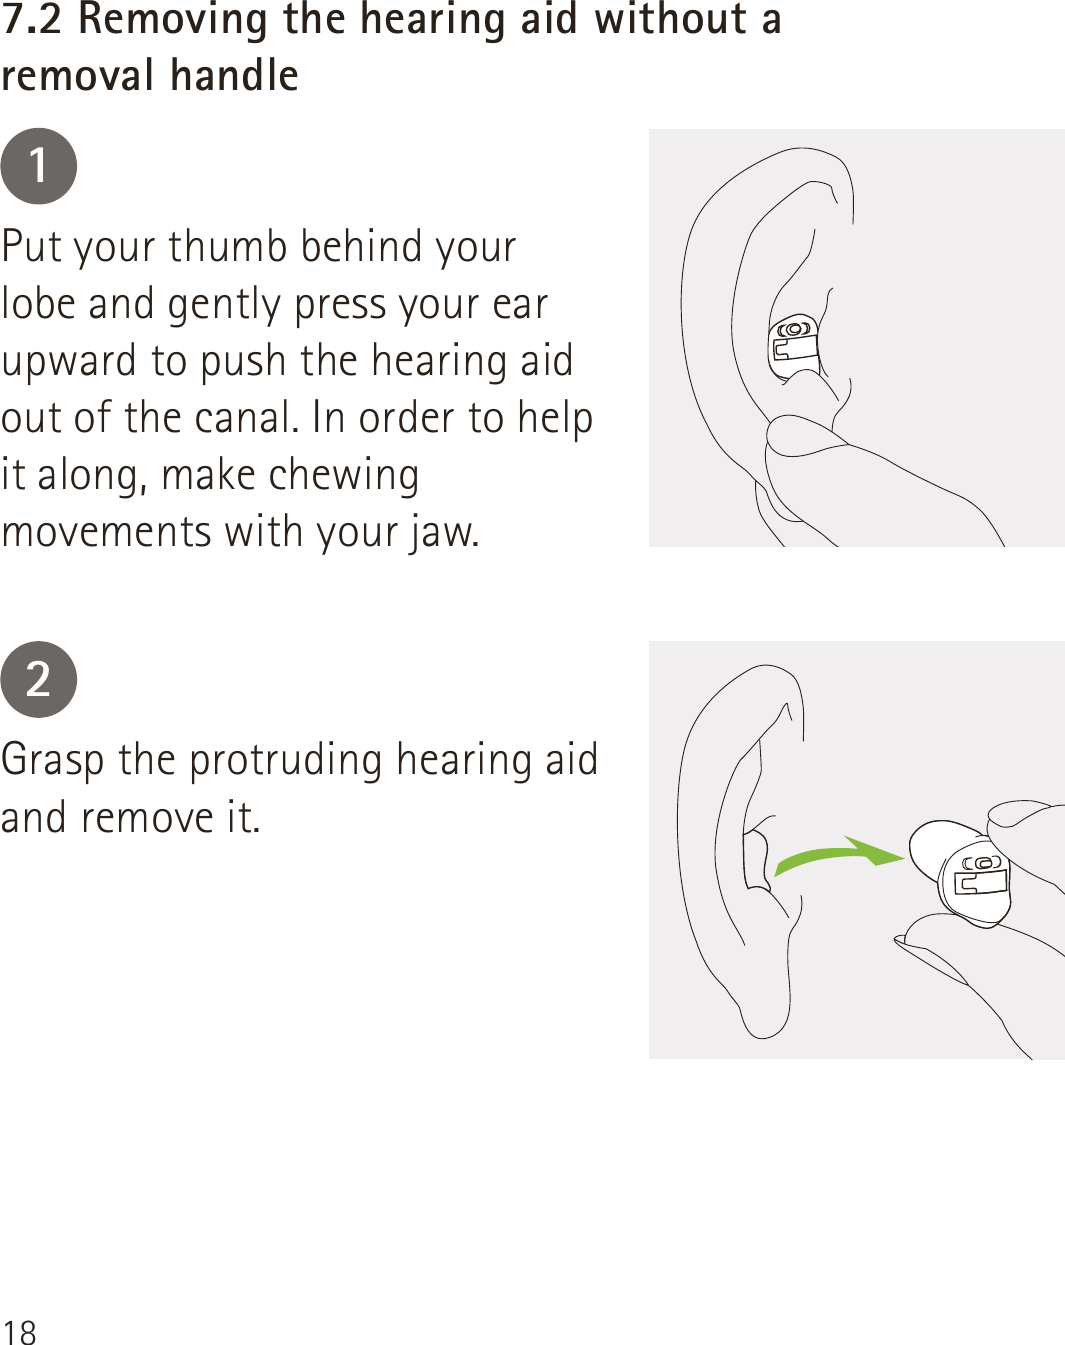 1812Put your thumb behind your lobe and gently press your ear upward to push the hearing aid out of the canal. In order to help it along, make chewing movements with your jaw.Grasp the protruding hearing aid and remove it.7.2 Removing the hearing aid without a  removal handle